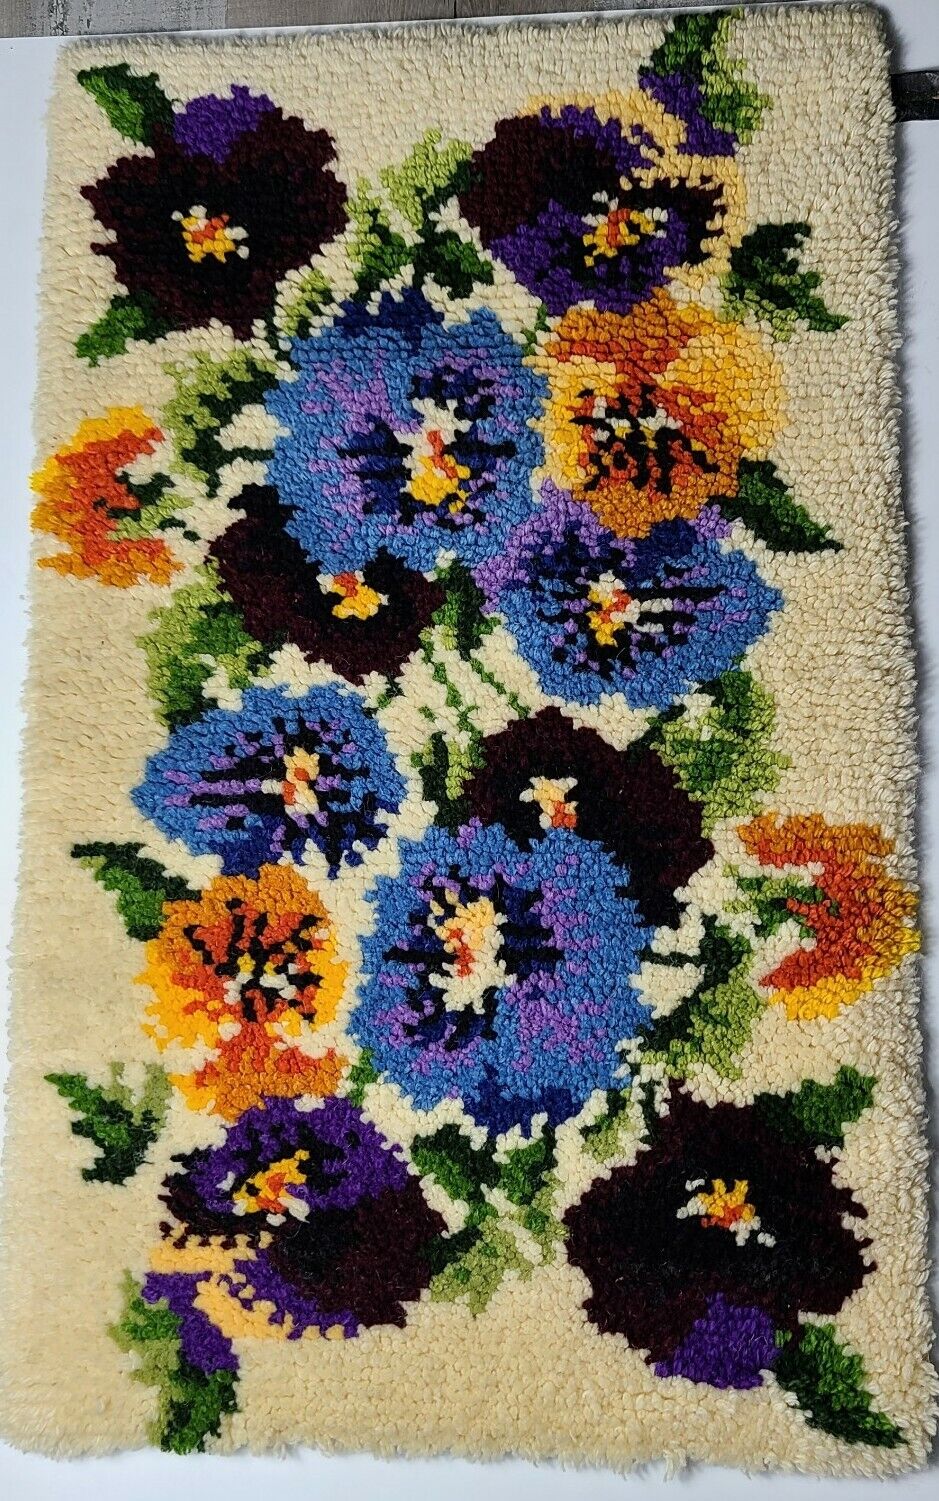 Stillcraft  Wool Latch Hook Rug Completed Floral Cream With Flowers Vtg 35x22